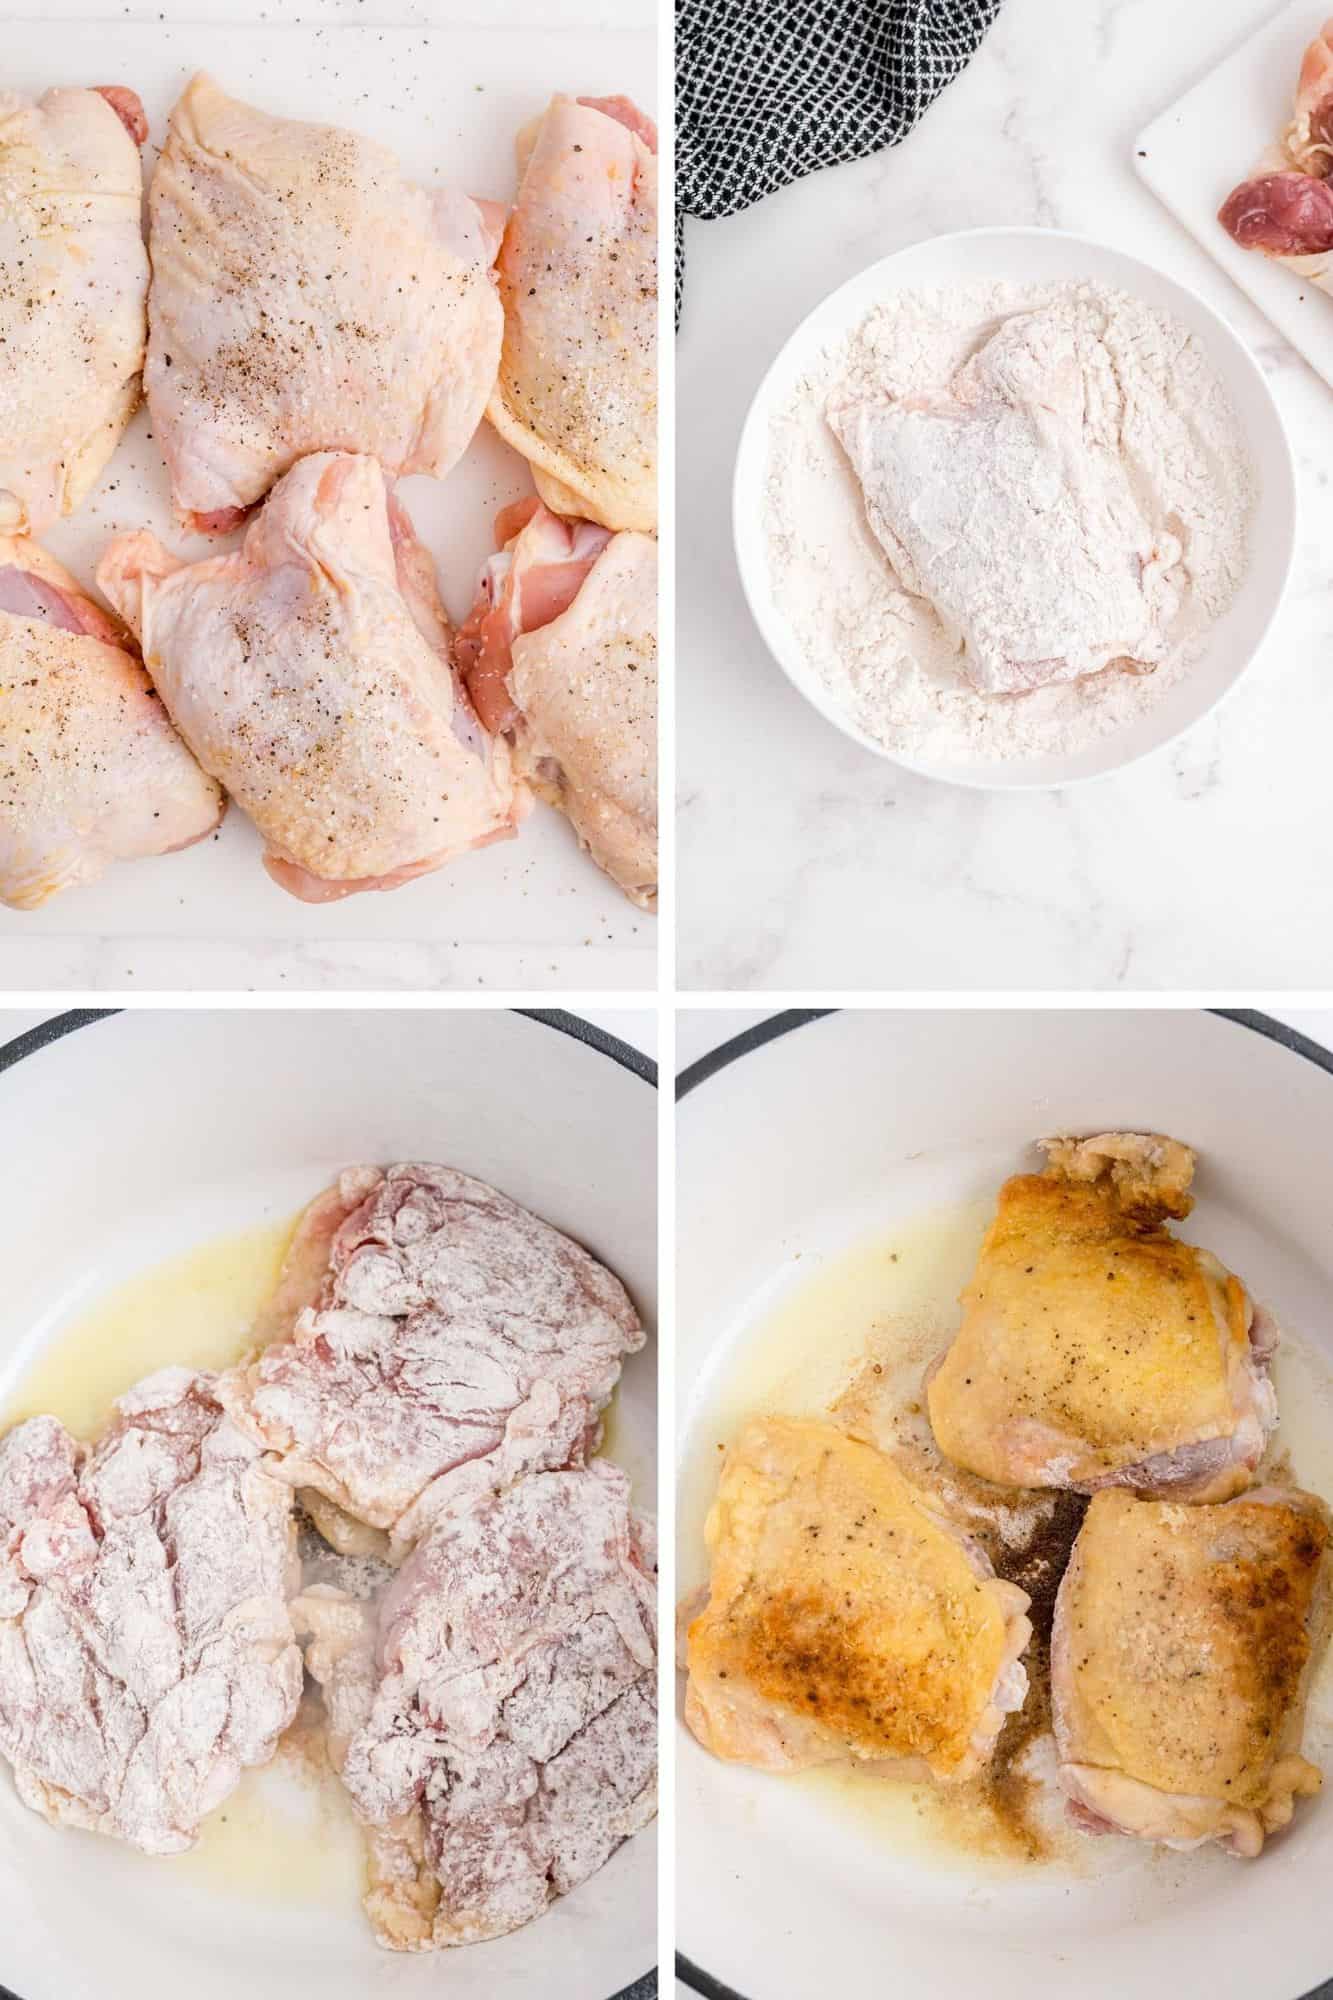 4 images showing how to brown chicken thighs for chicken cacciatore.